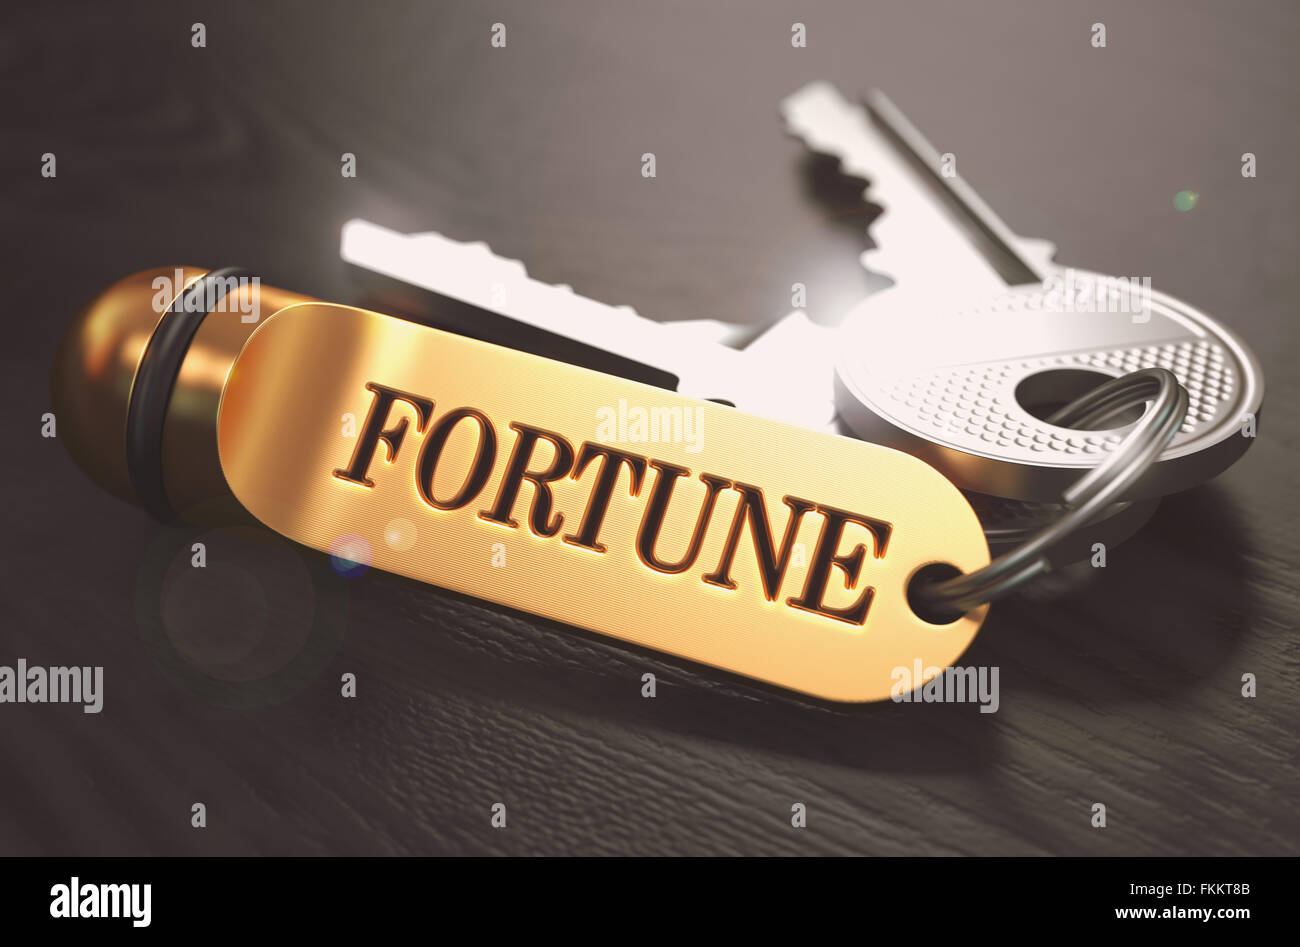 Keys to Fortune. Concept on Golden Keychain. Stock Photo